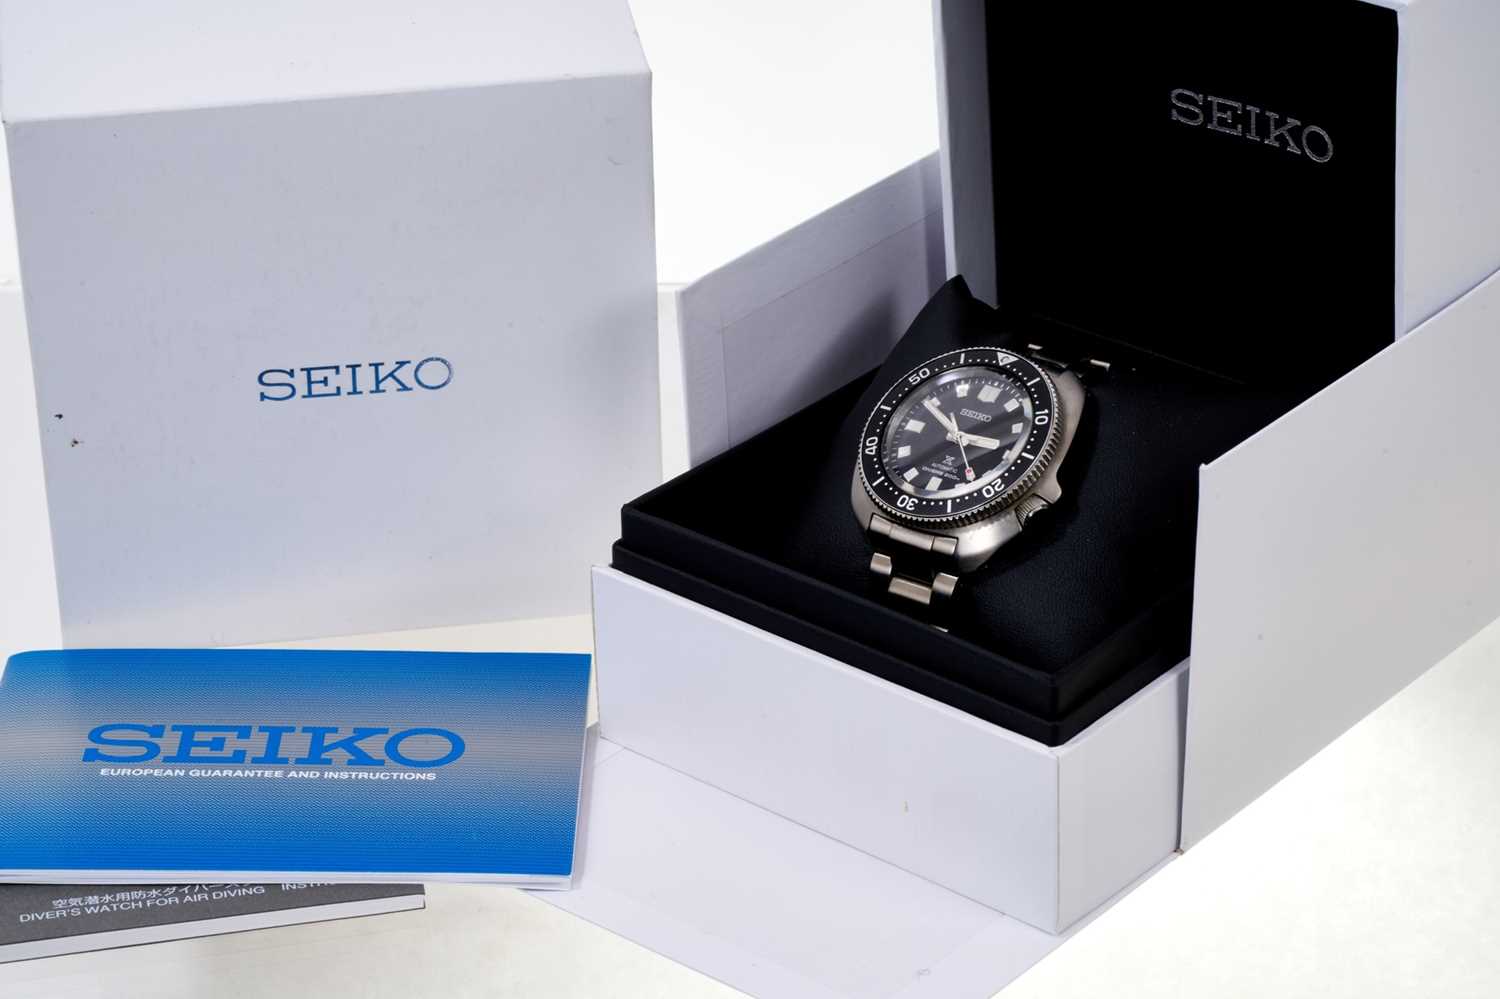 Seiko ‘Captain Willard’ divers wristwatch in box with papers - Image 5 of 5